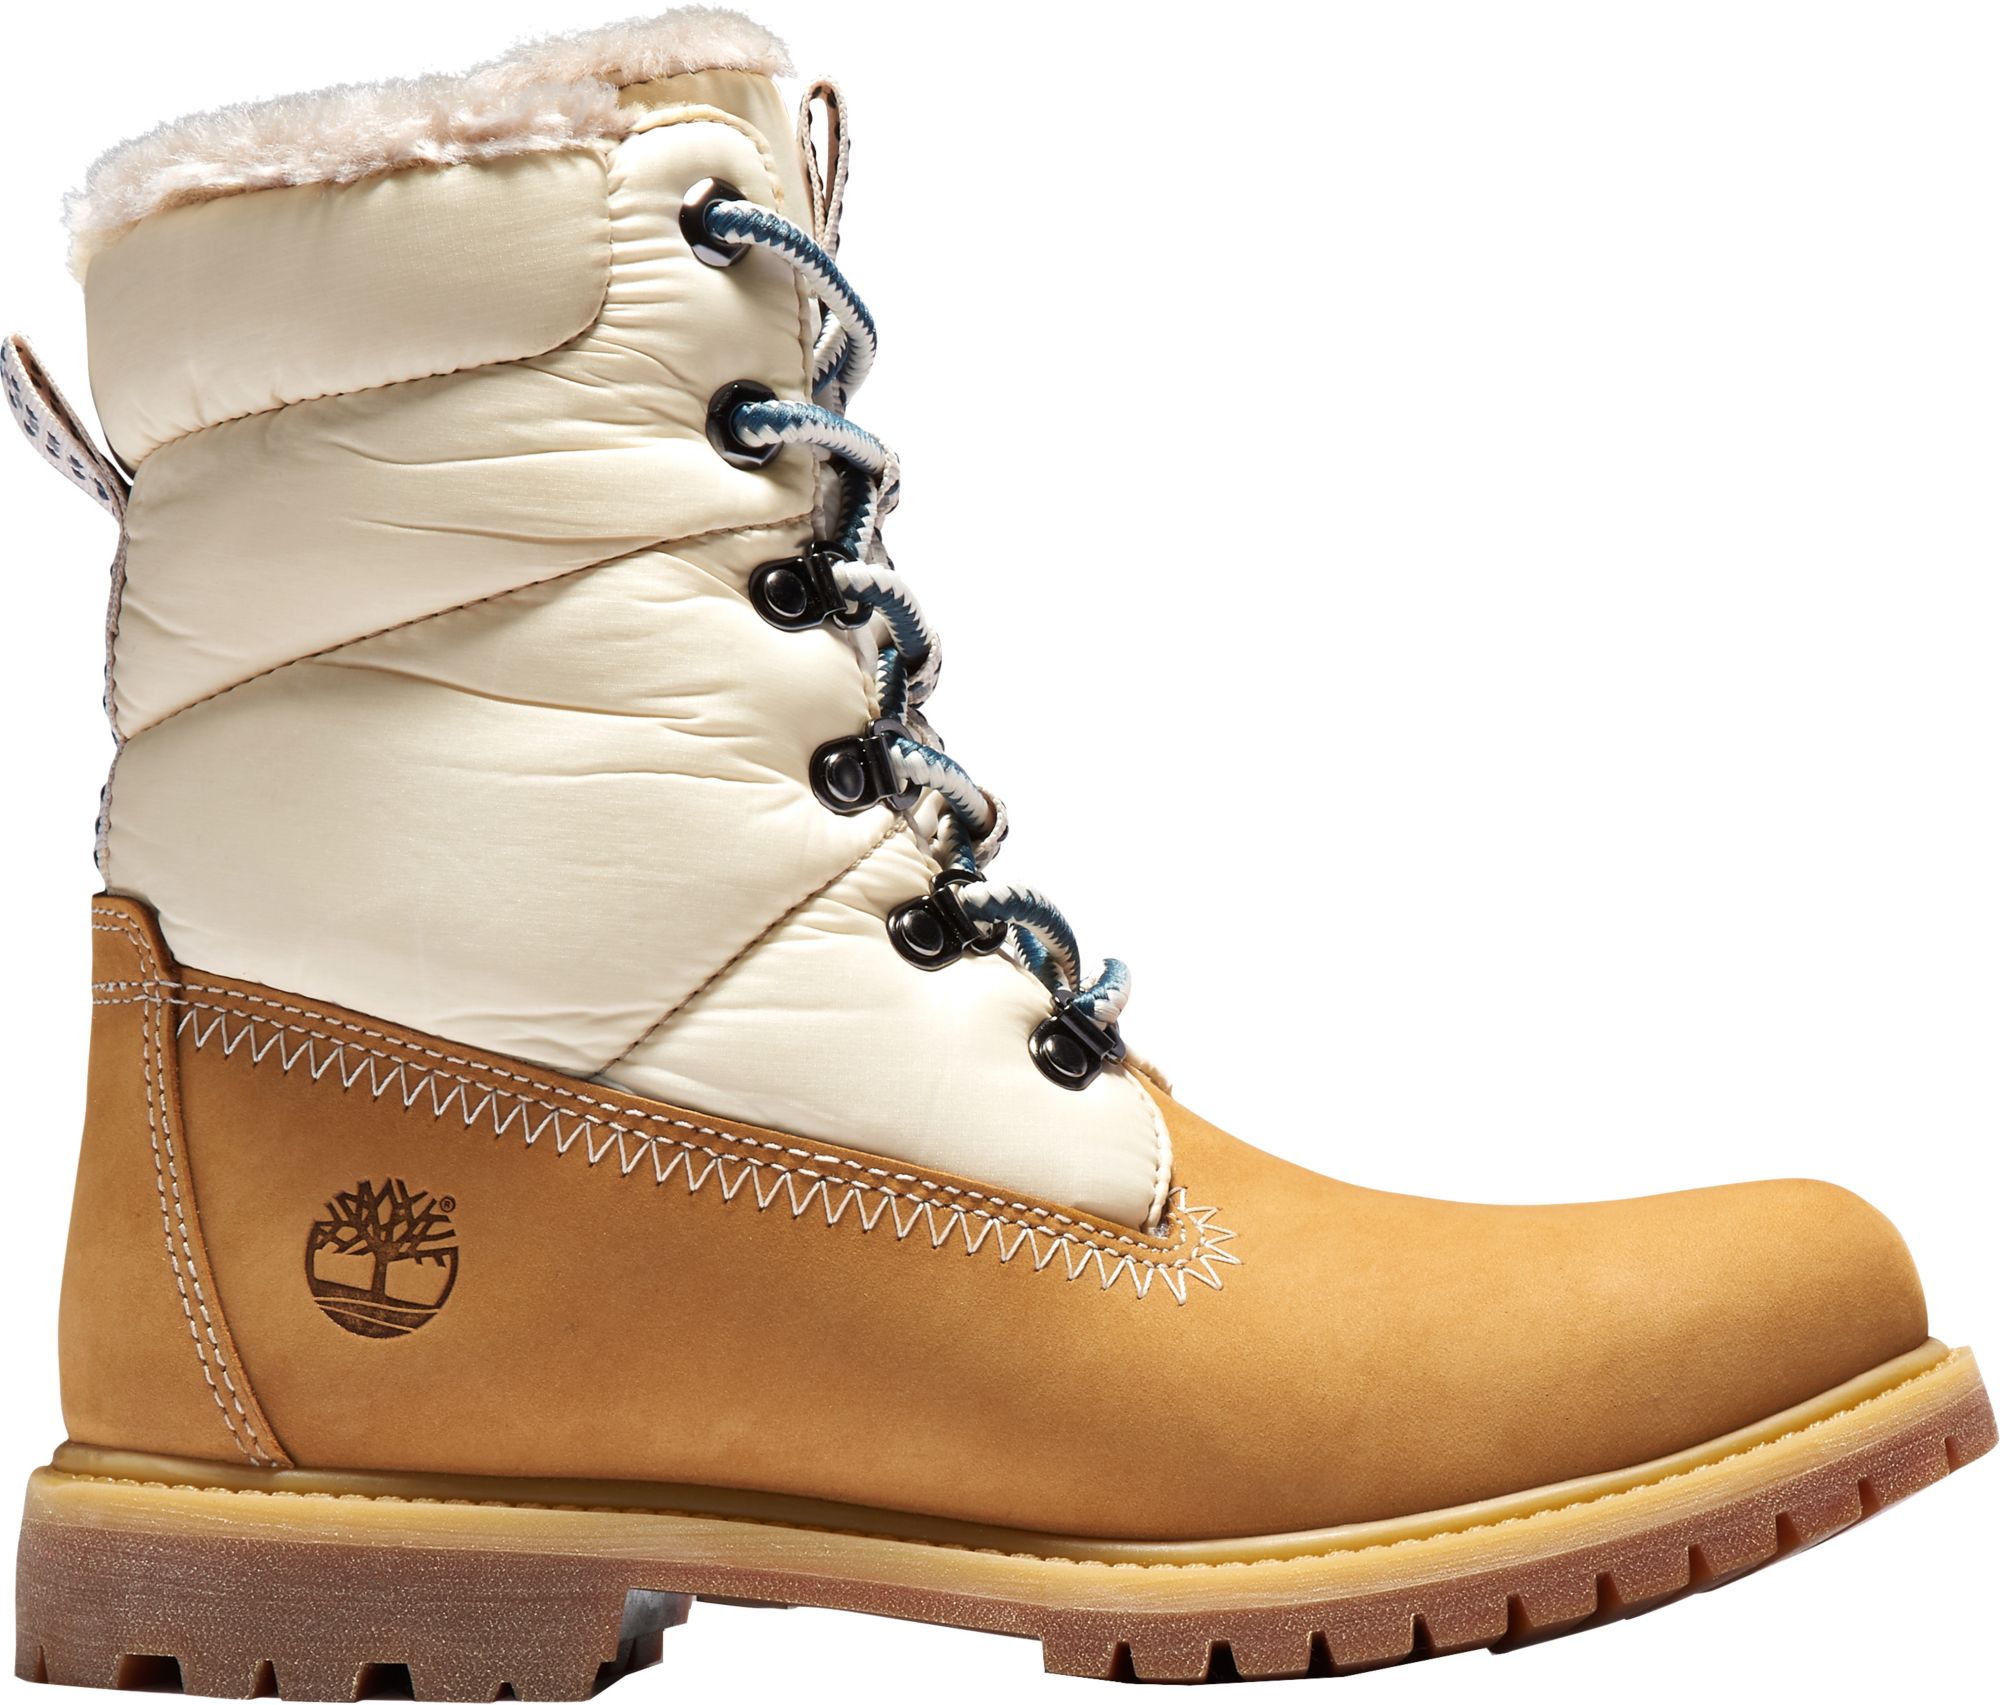 Timberland Boots \u0026 Shoes | Curbside 